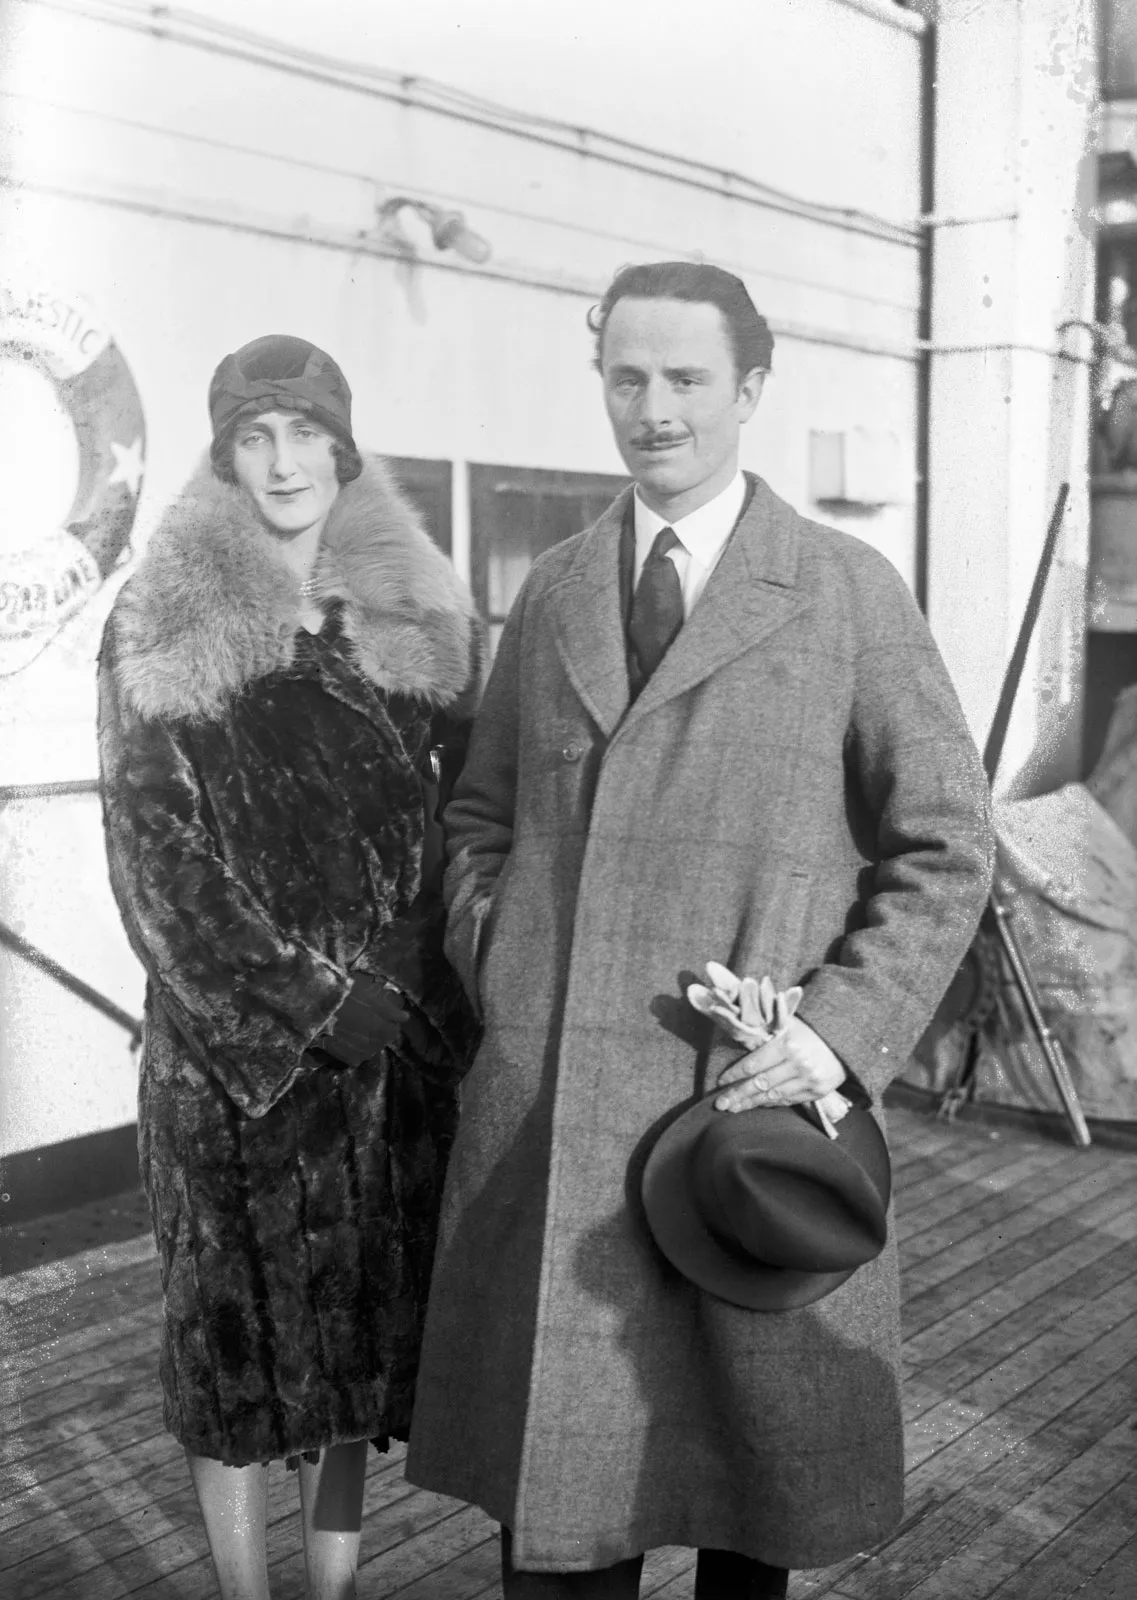 Sir Oswald Mosley, 6th Baronet, with his wife, Lady Cynthia Blanche Curzon.